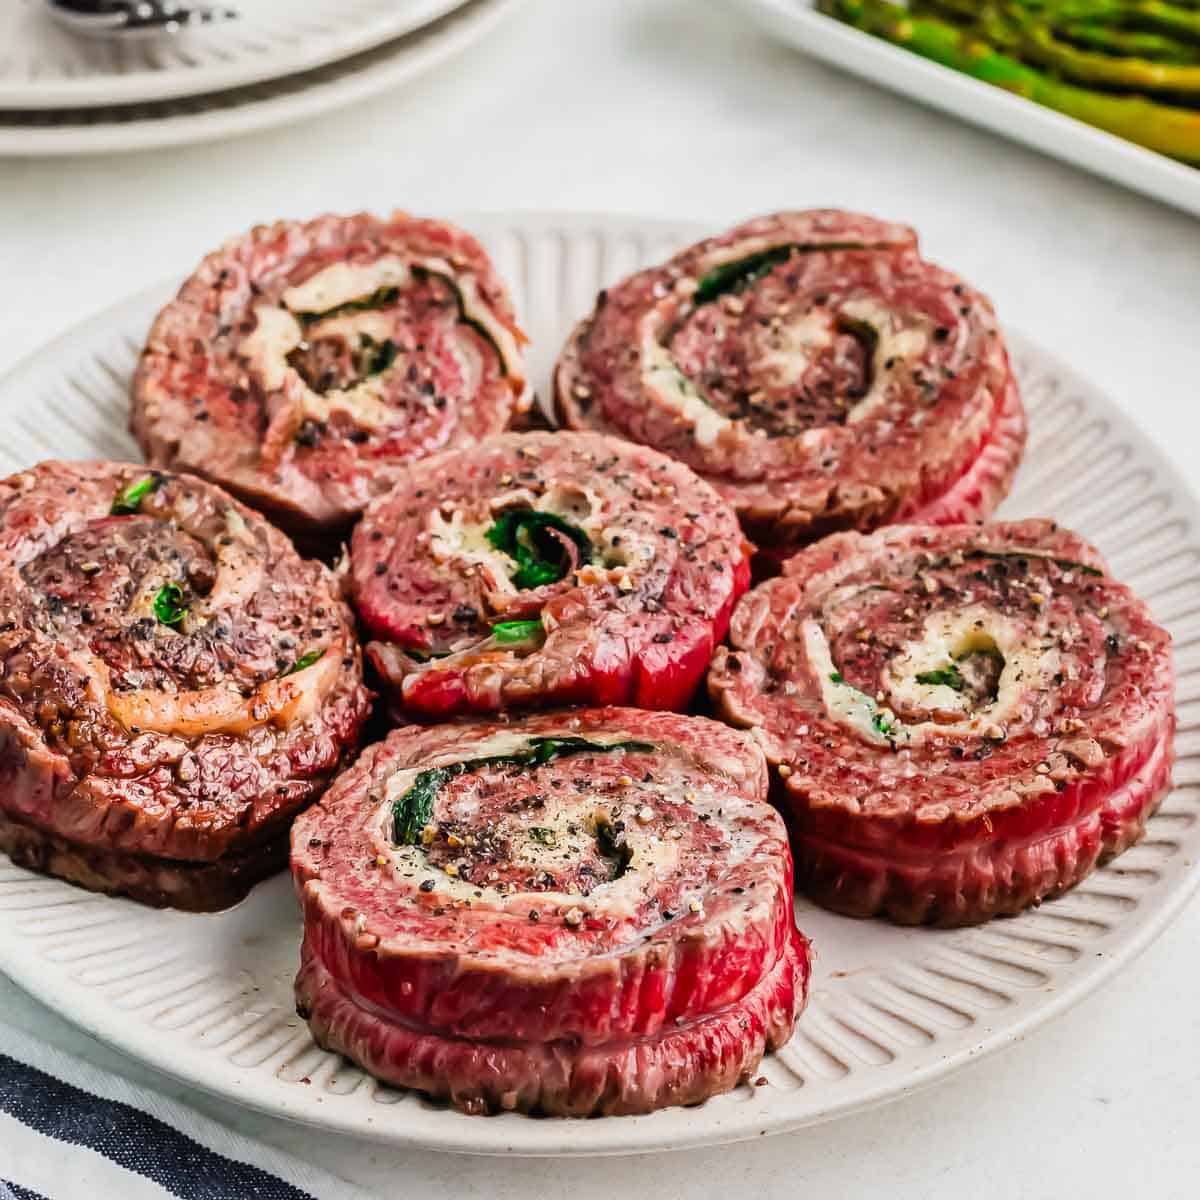 A plate of beef pinwheels filled with herbs and cheese.